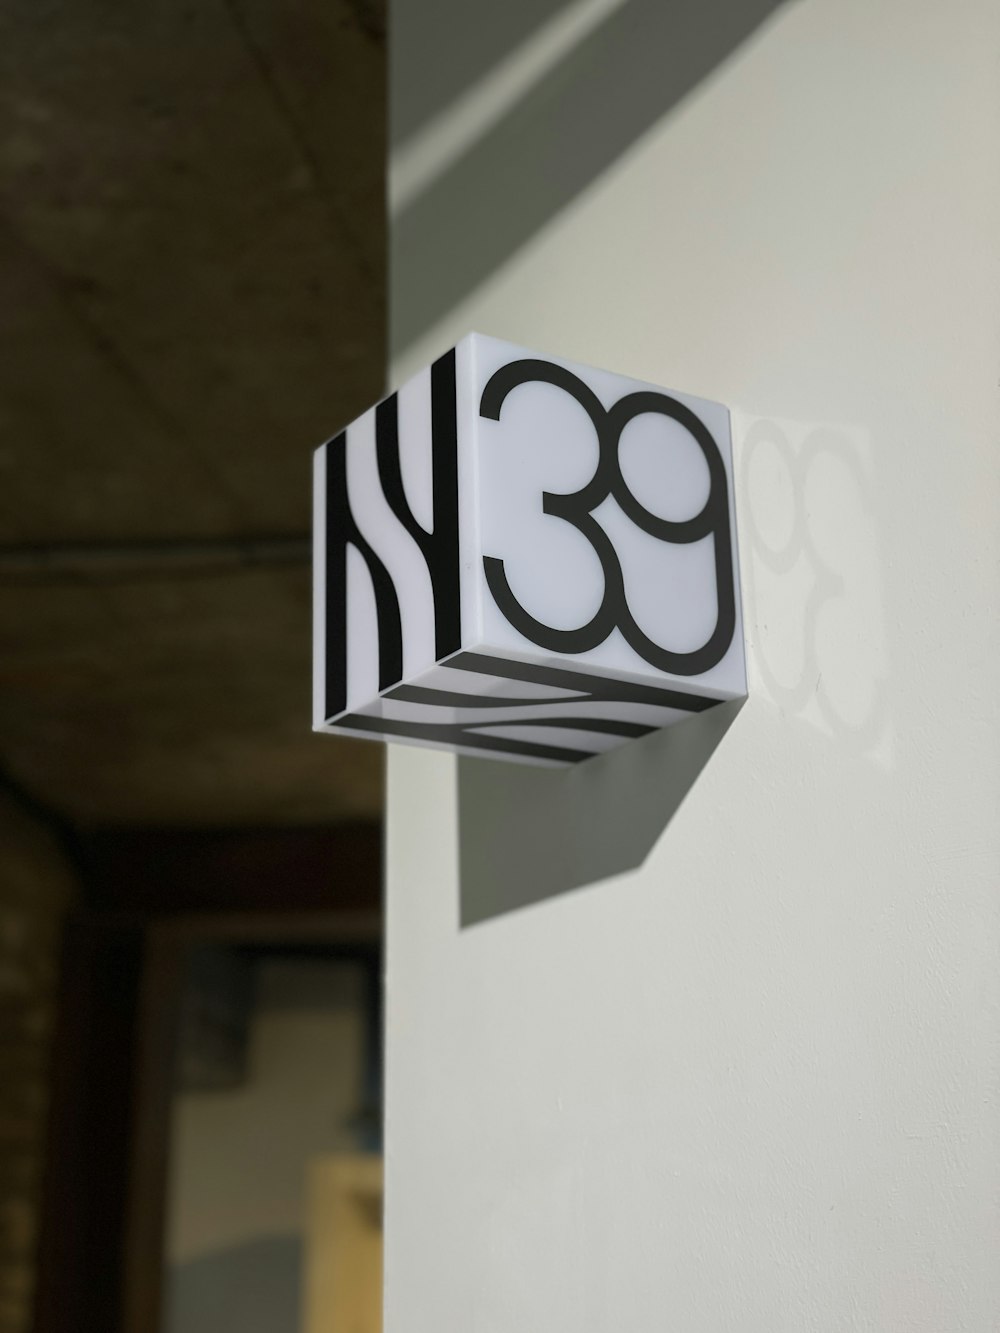 a close up of a door with a number on it